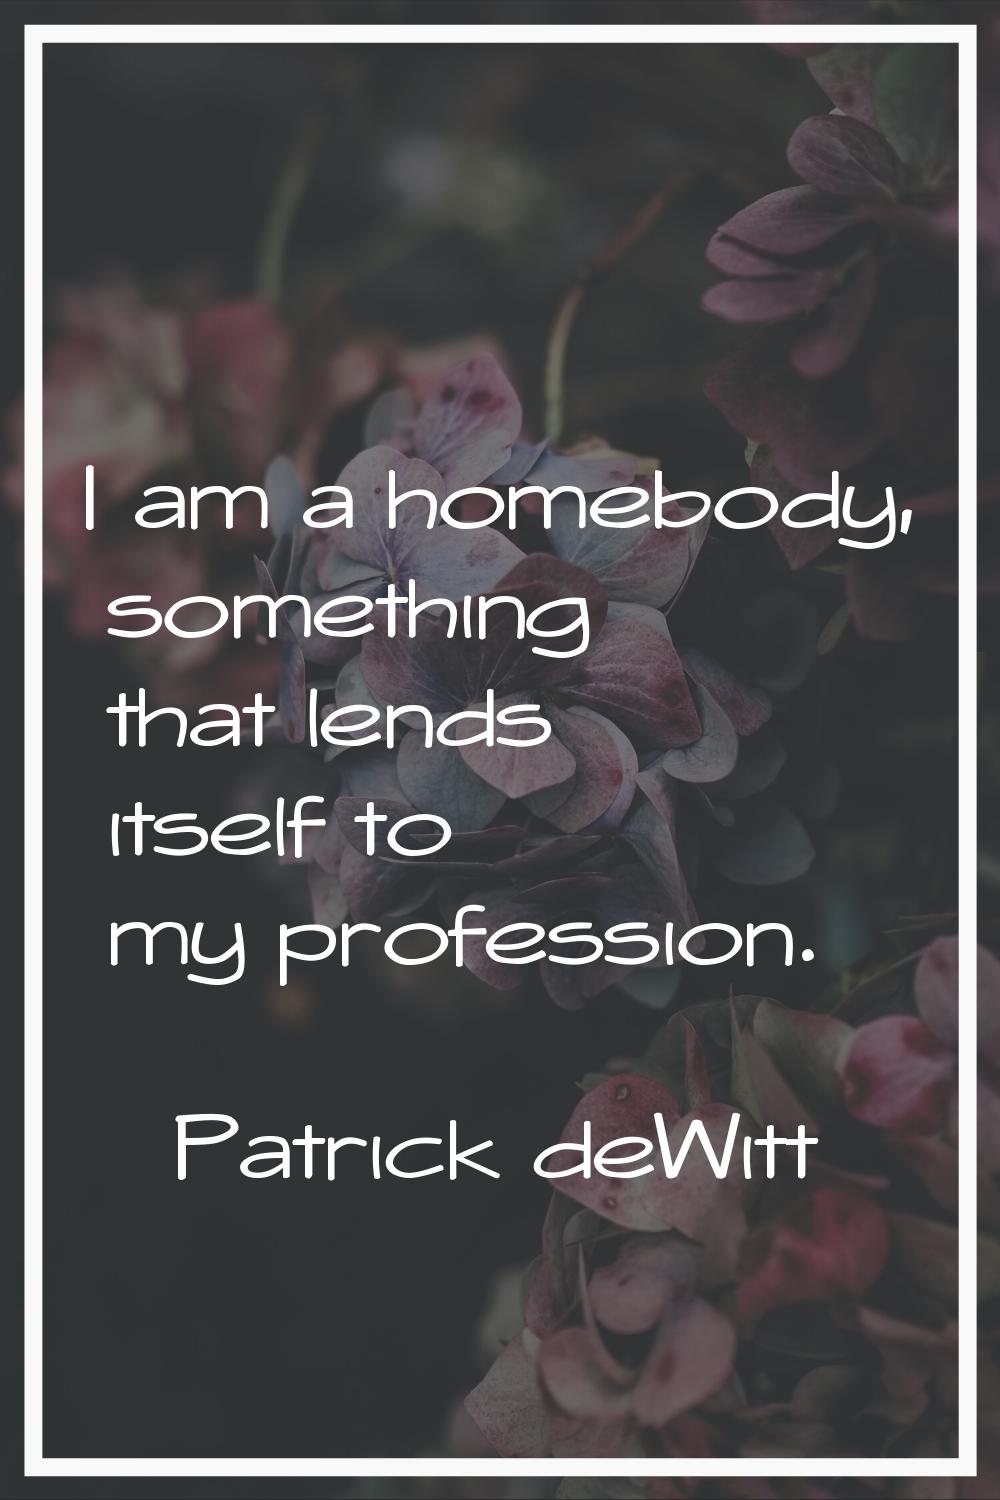 I am a homebody, something that lends itself to my profession.